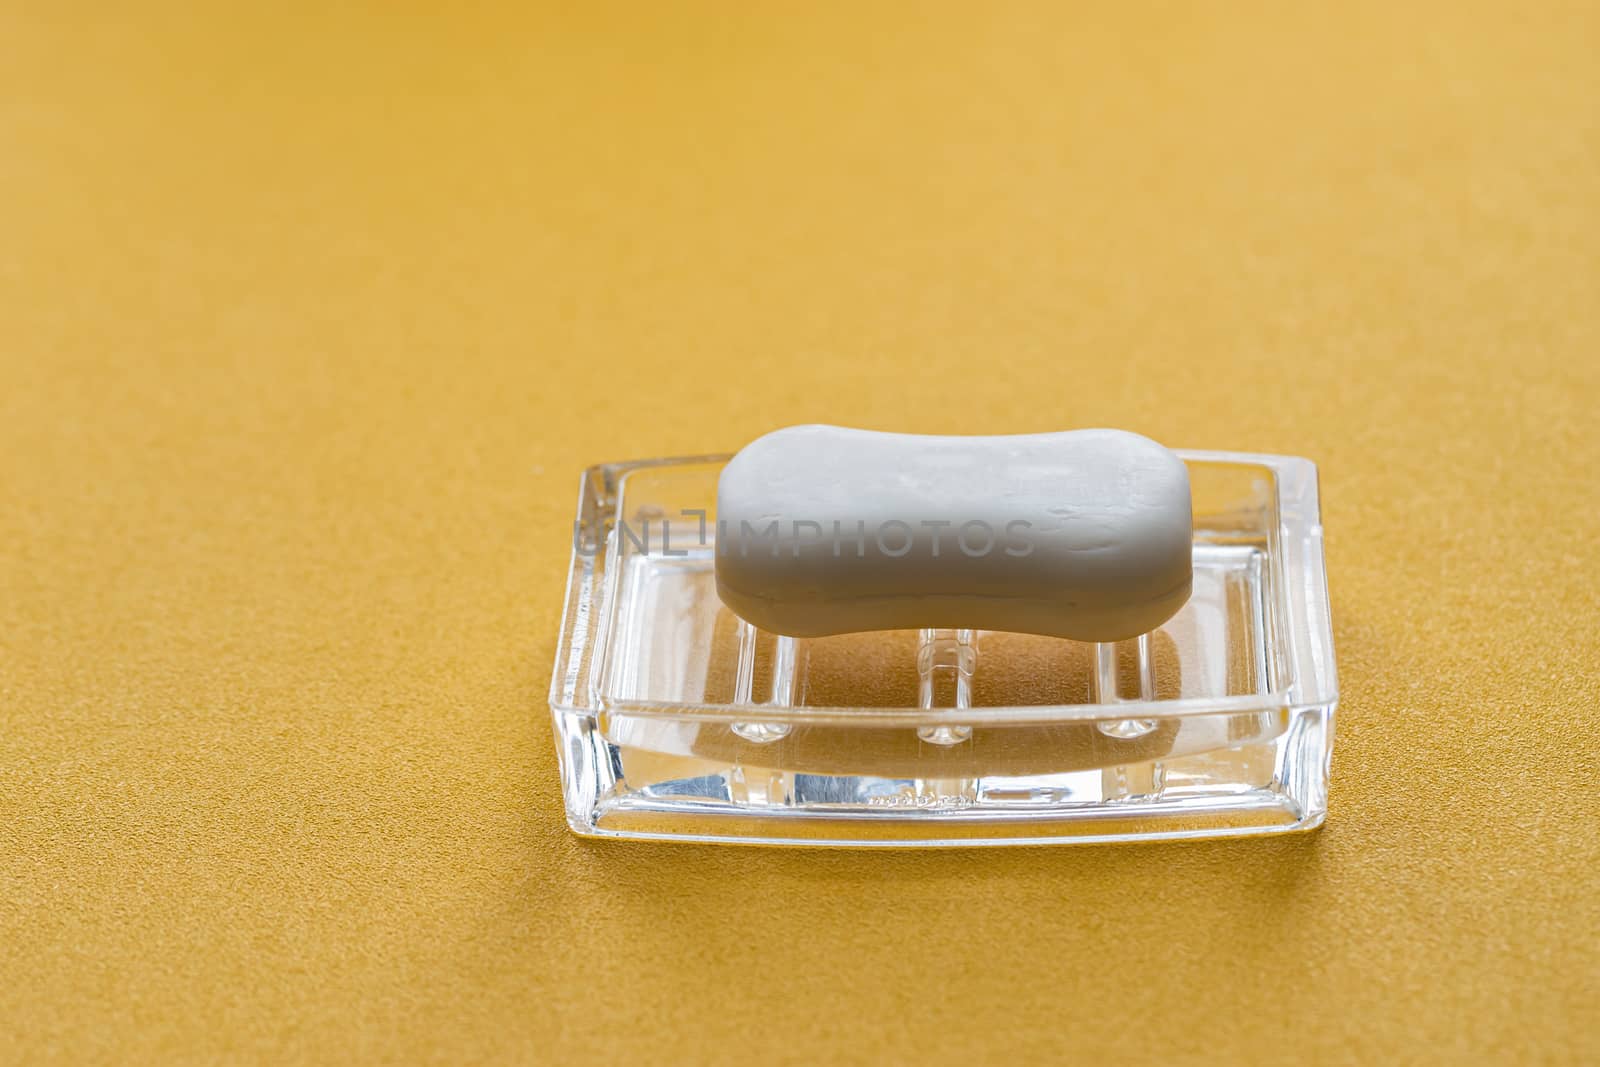 A piece of white soap on a transparent stand on a yellow background. Protect against the coronavirus. Coronavirus pandemic protection by washing hands frequently.